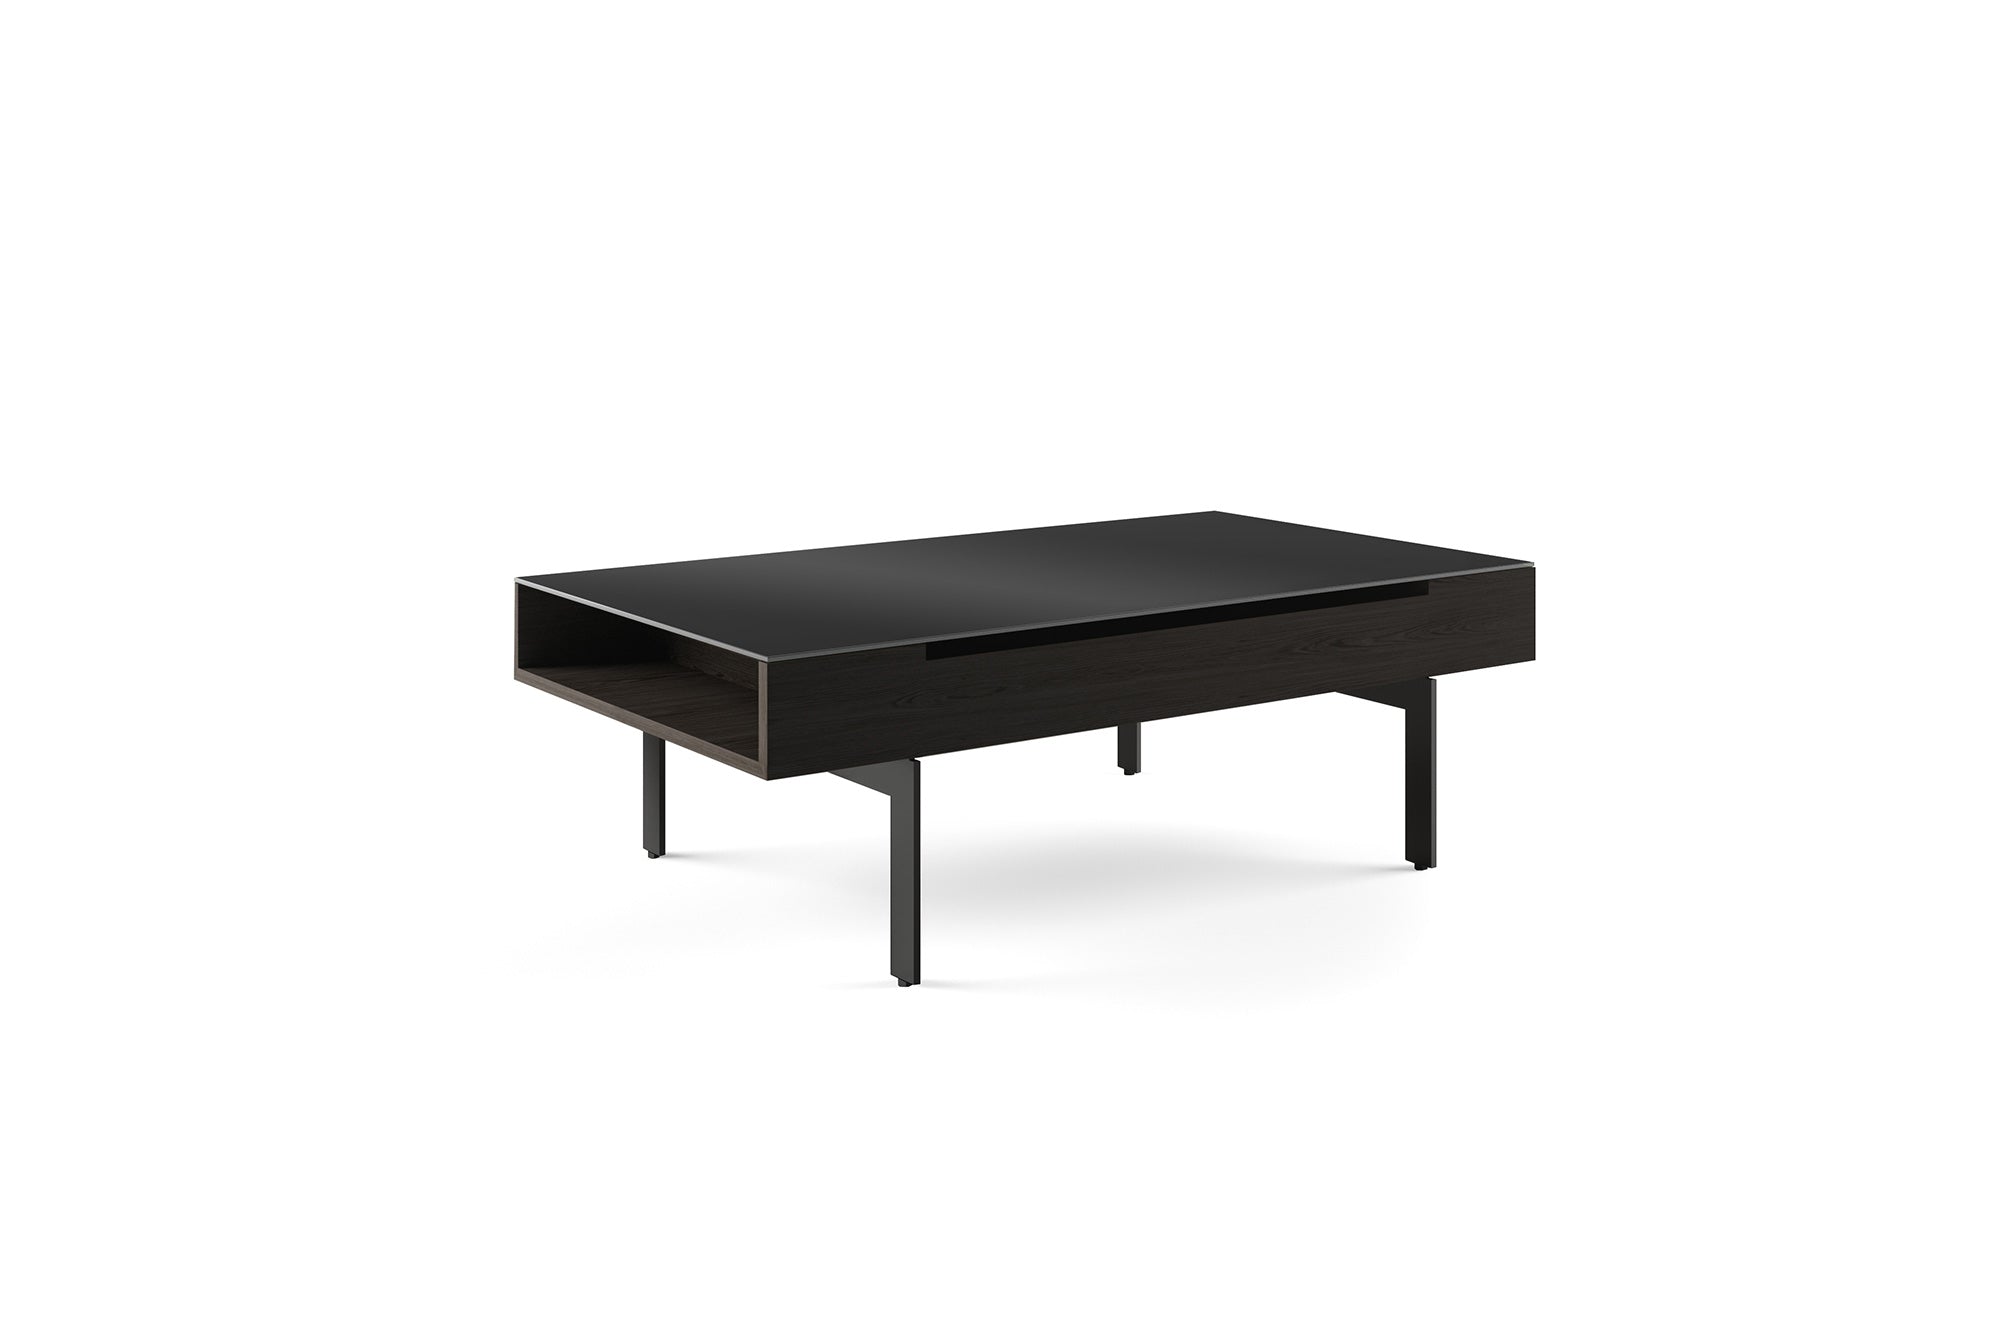 Reveal 1192 Lift Top Coffee Table